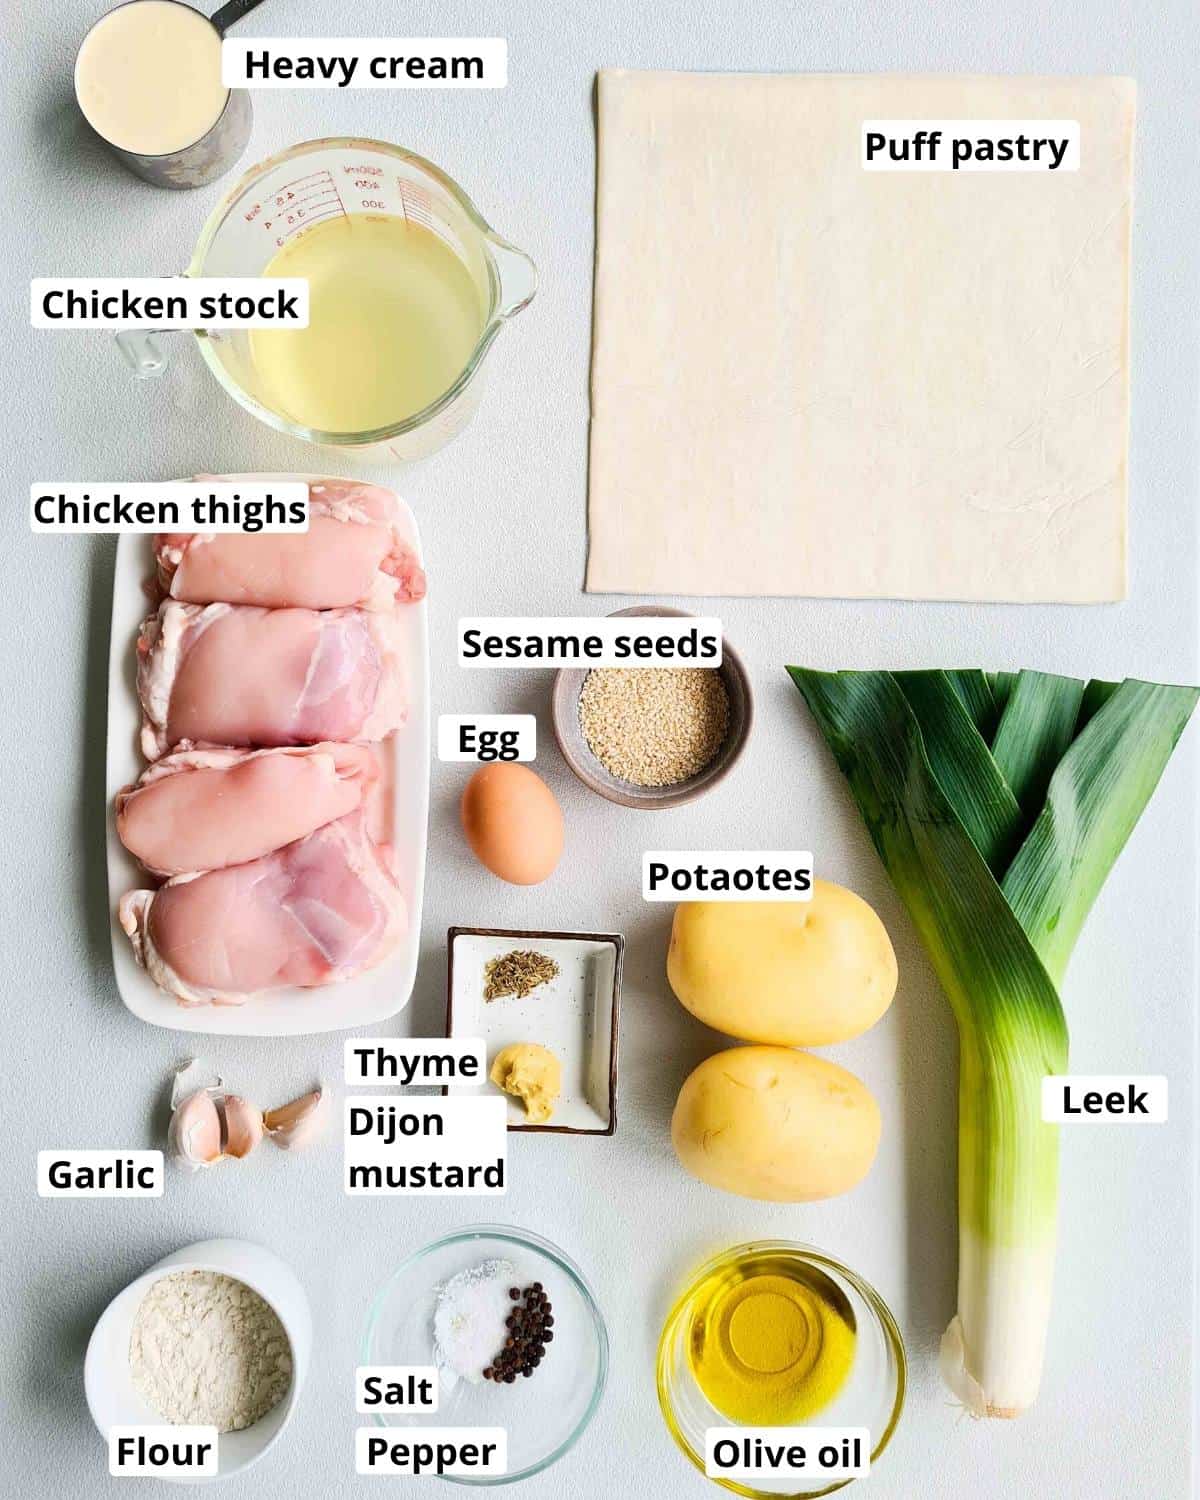 Ingredients required to make this recipe